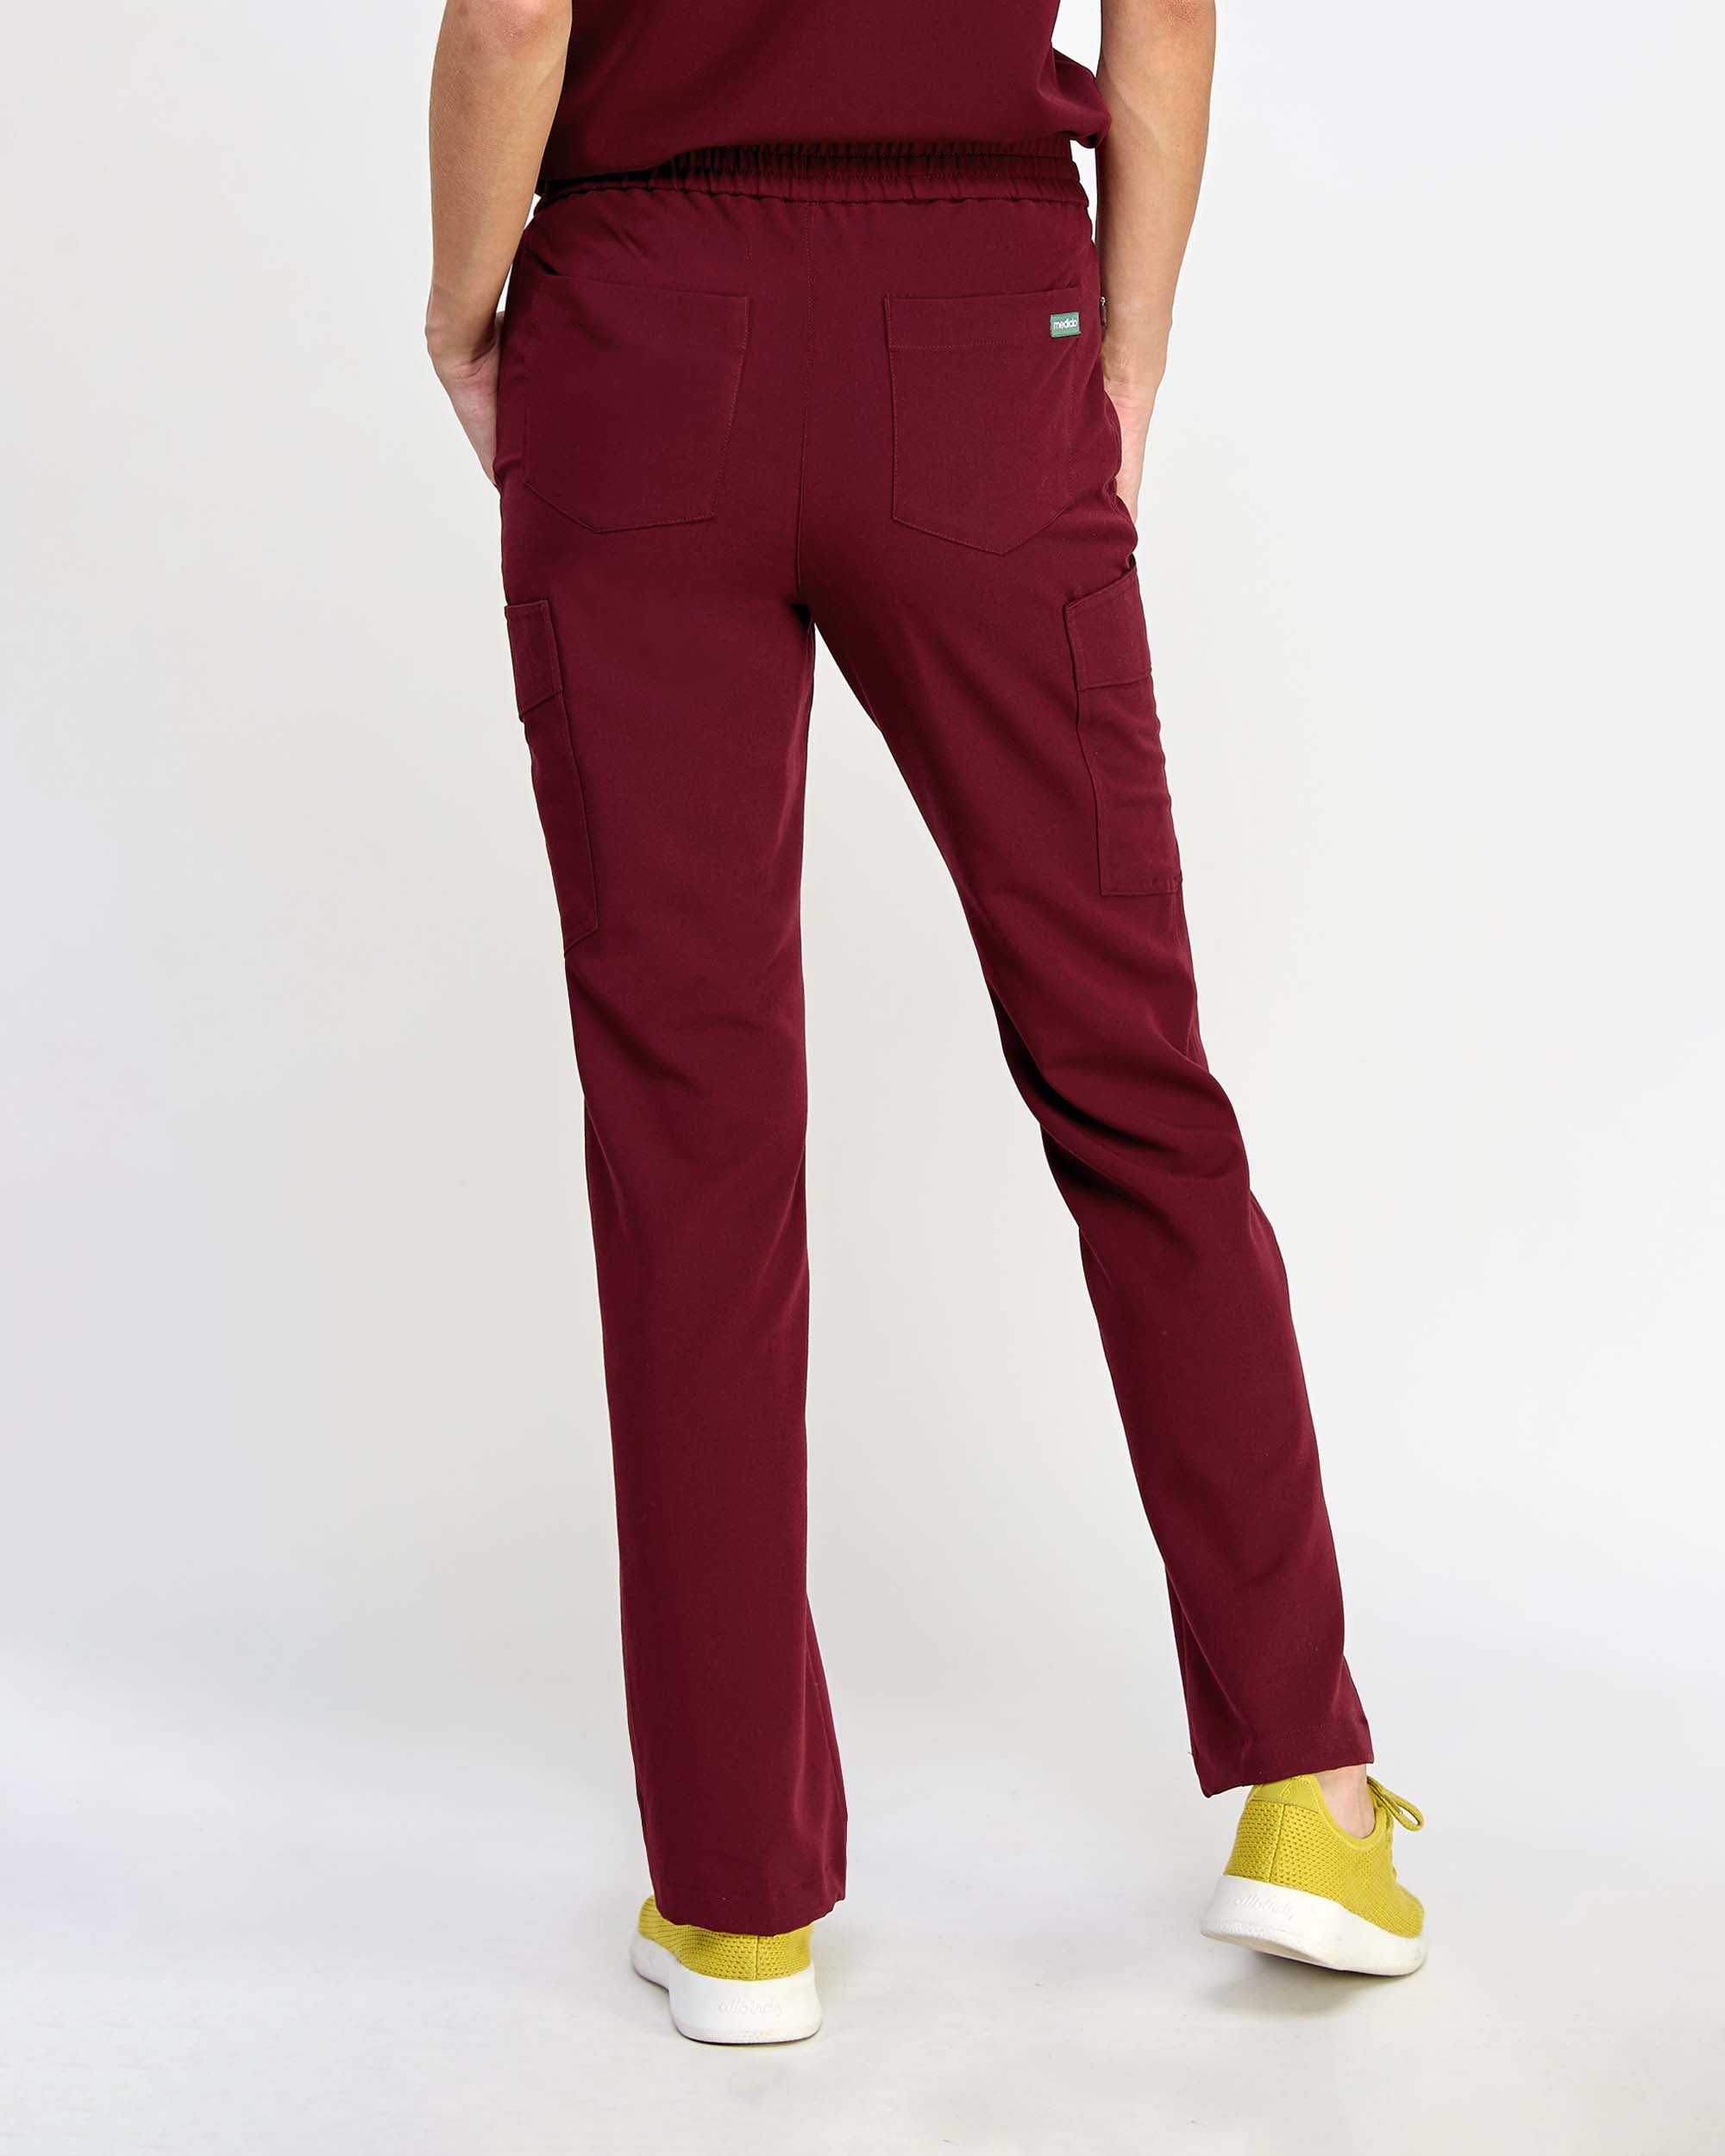 Burgundy Cargo Pants Outfits (5 ideas & outfits) | Lookastic